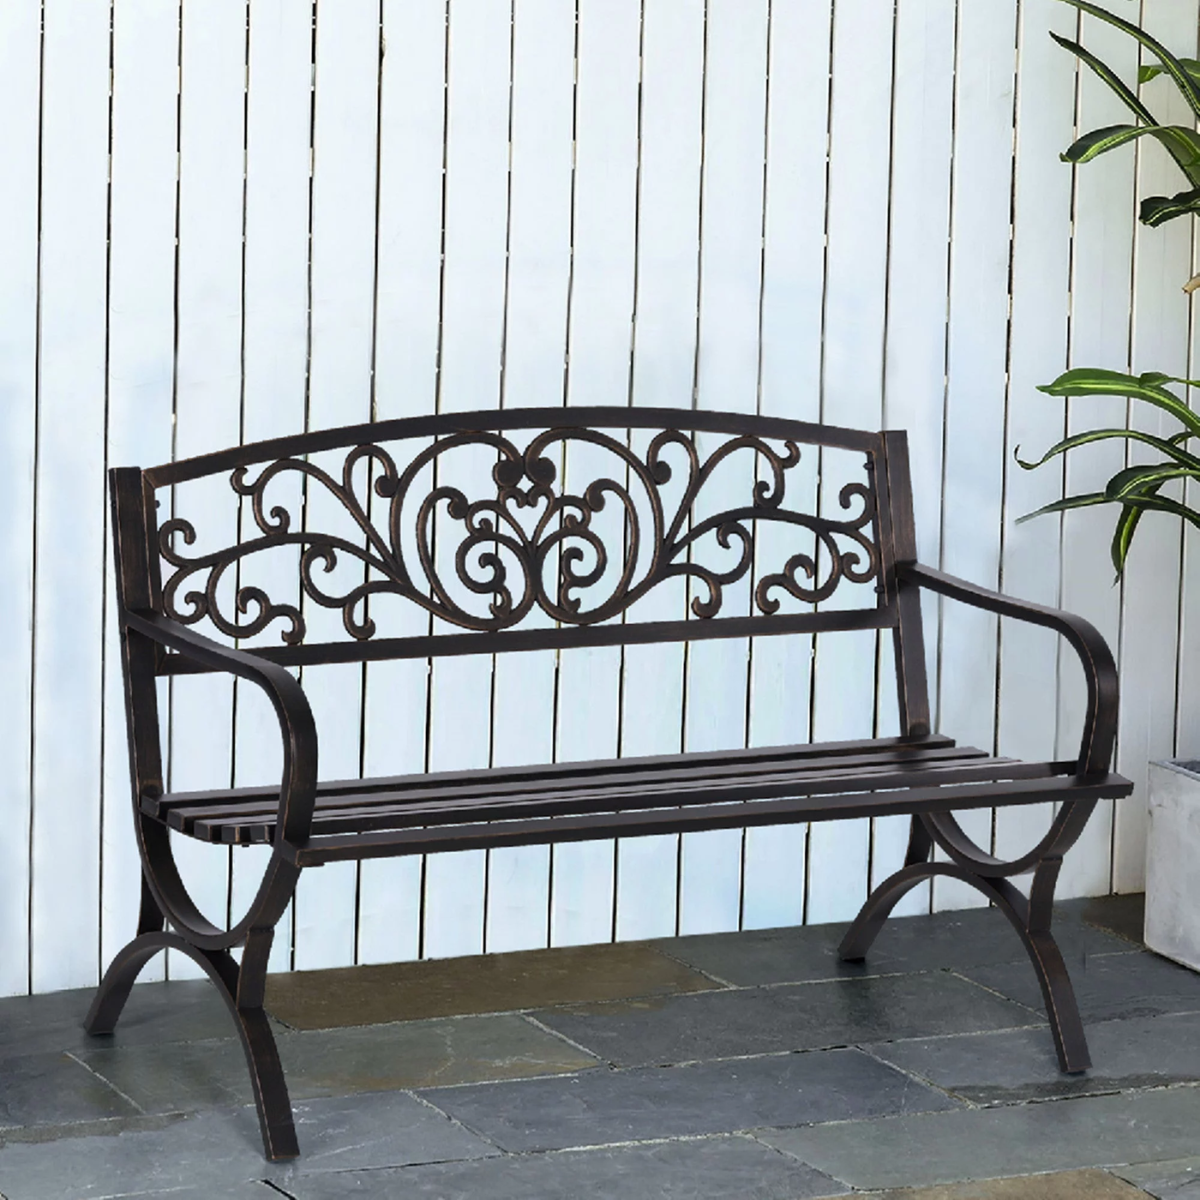 44. Surprise Her with an Iron-Coated Outdoor Bench